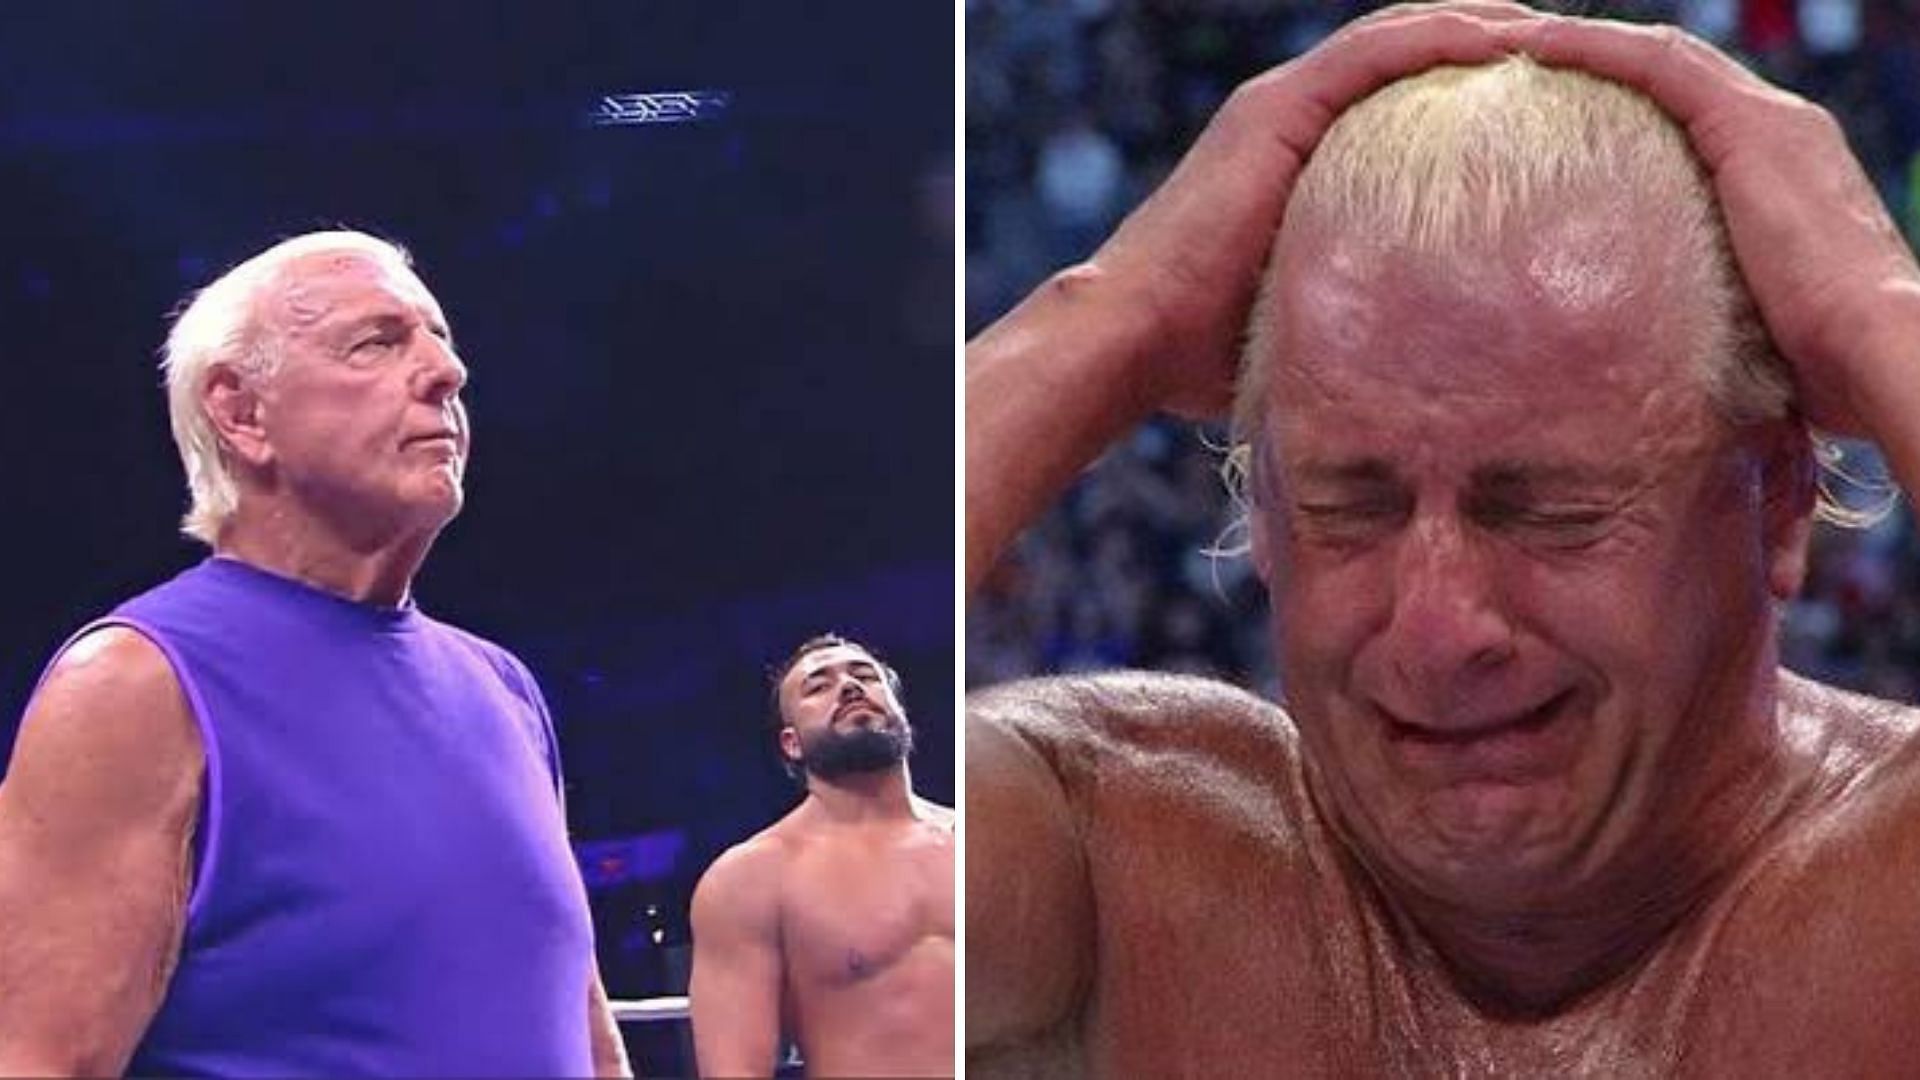 The Nature Boy stepped into the ring for the last time